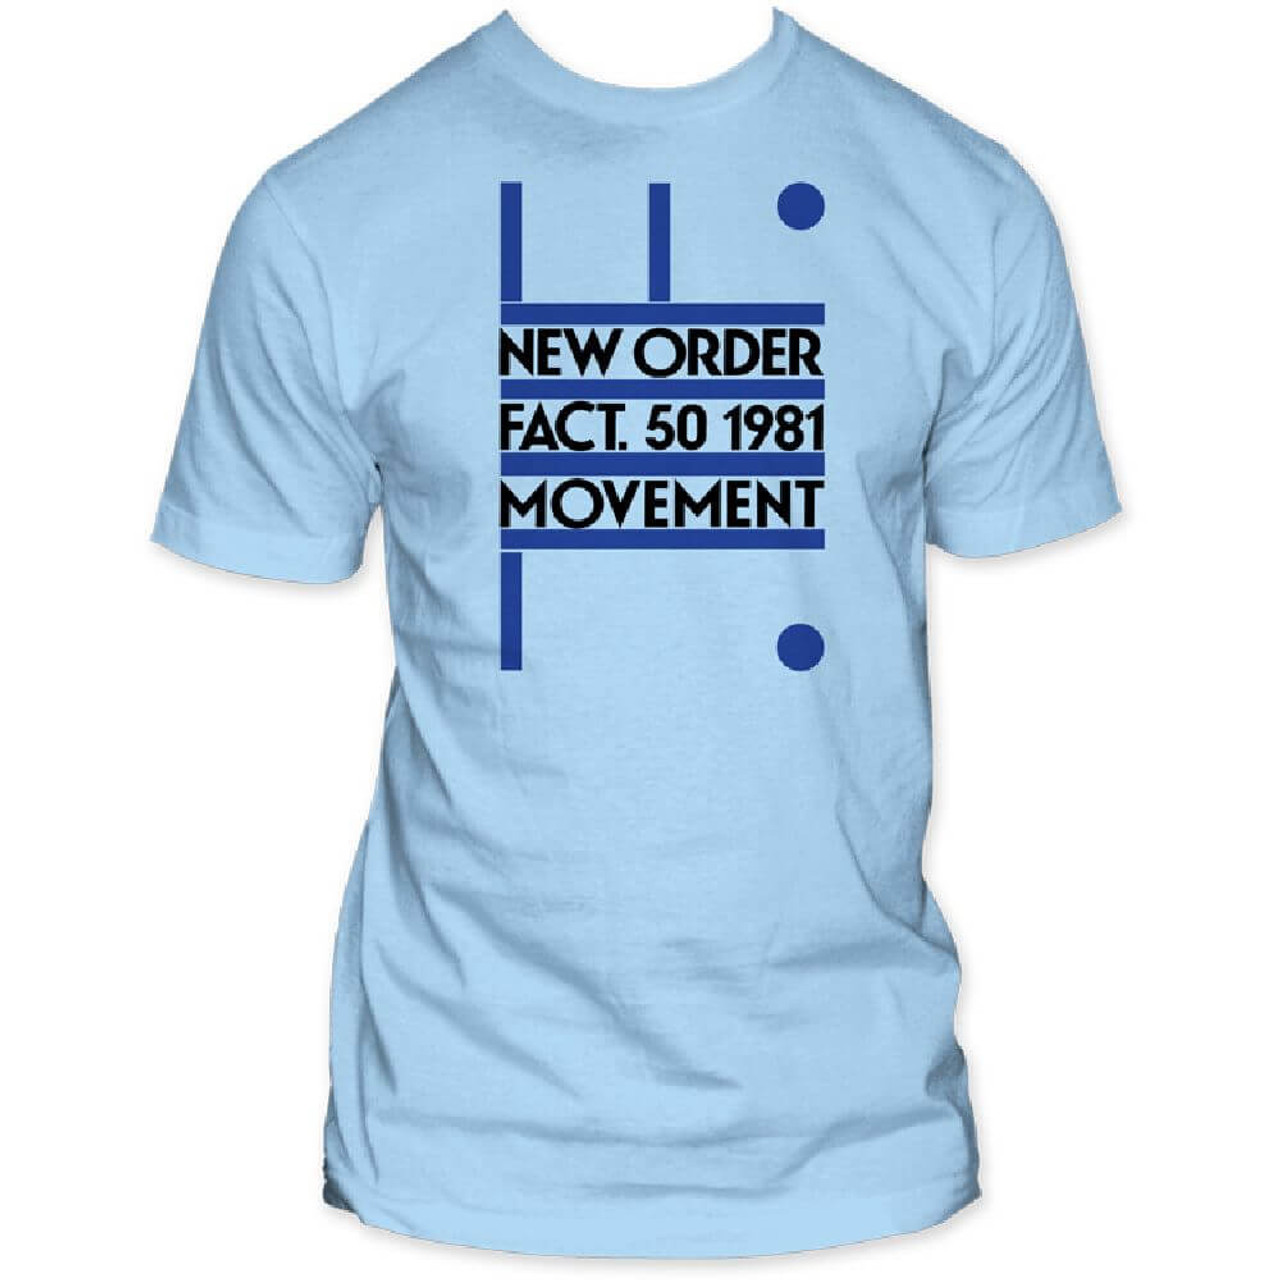 New order коды. New order t Shirt. The New order Shirt. New order Movement. New order Movement Cover.